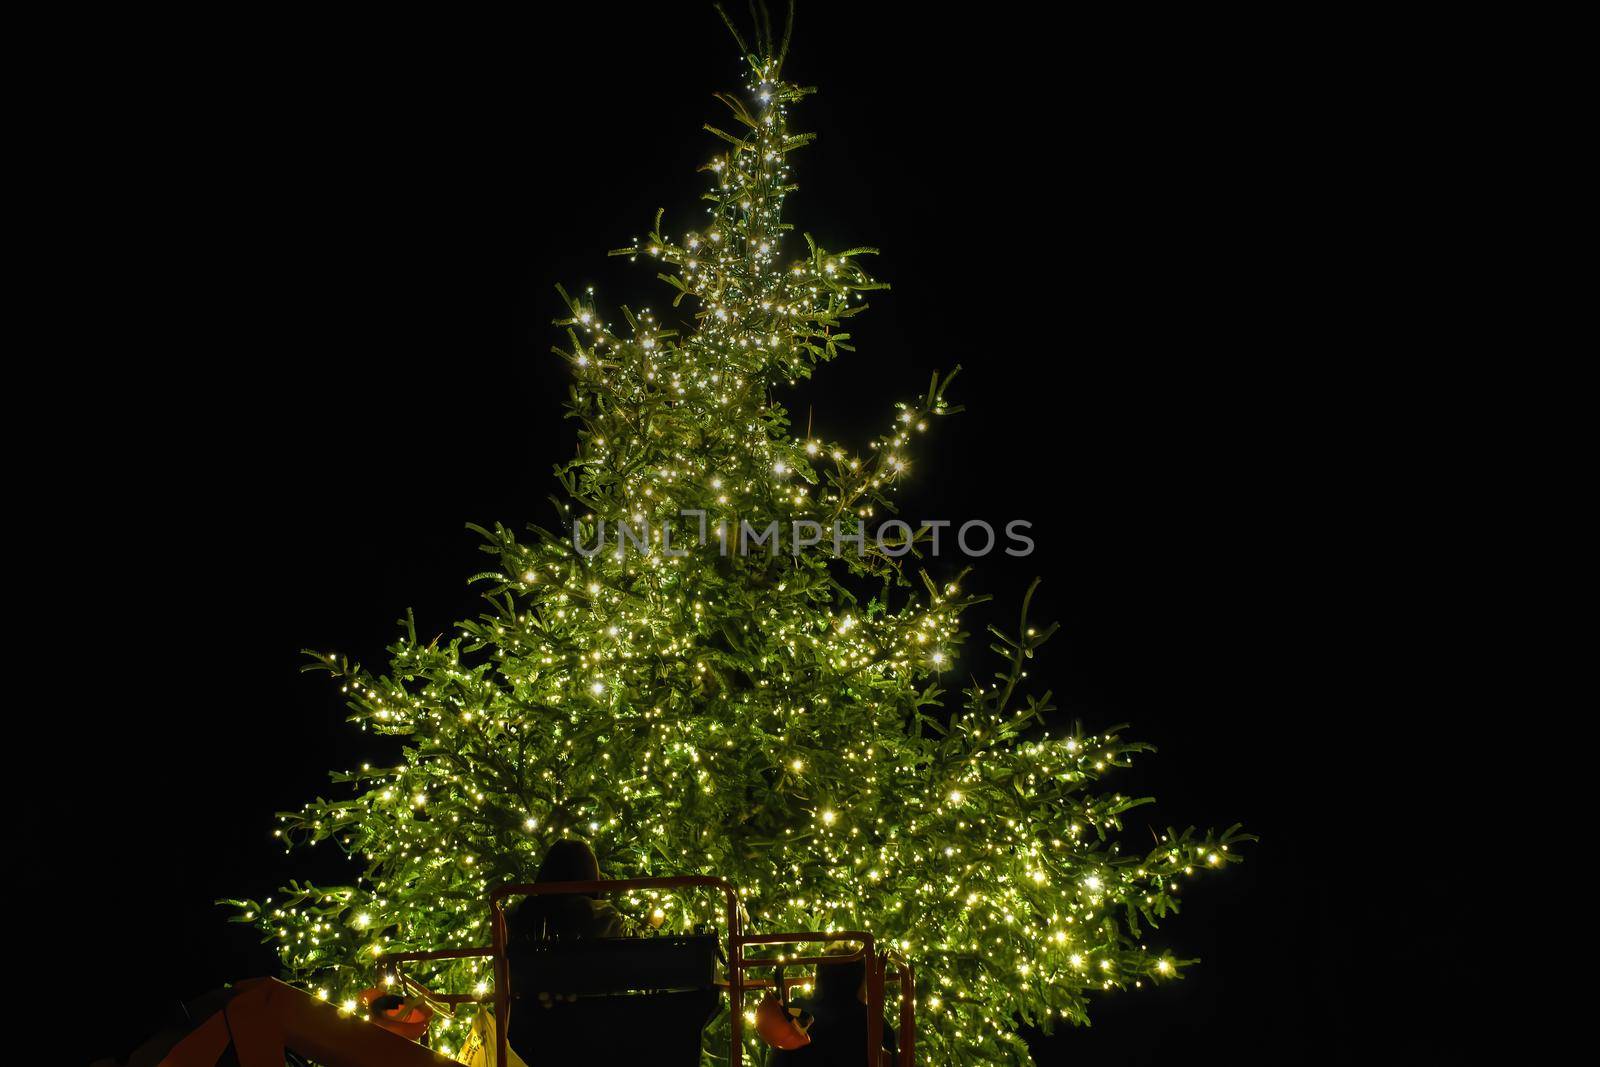 Night view of festive instalments with lit bulbs on a big pine at Aristotelous square in Thessaloniki, Greece.